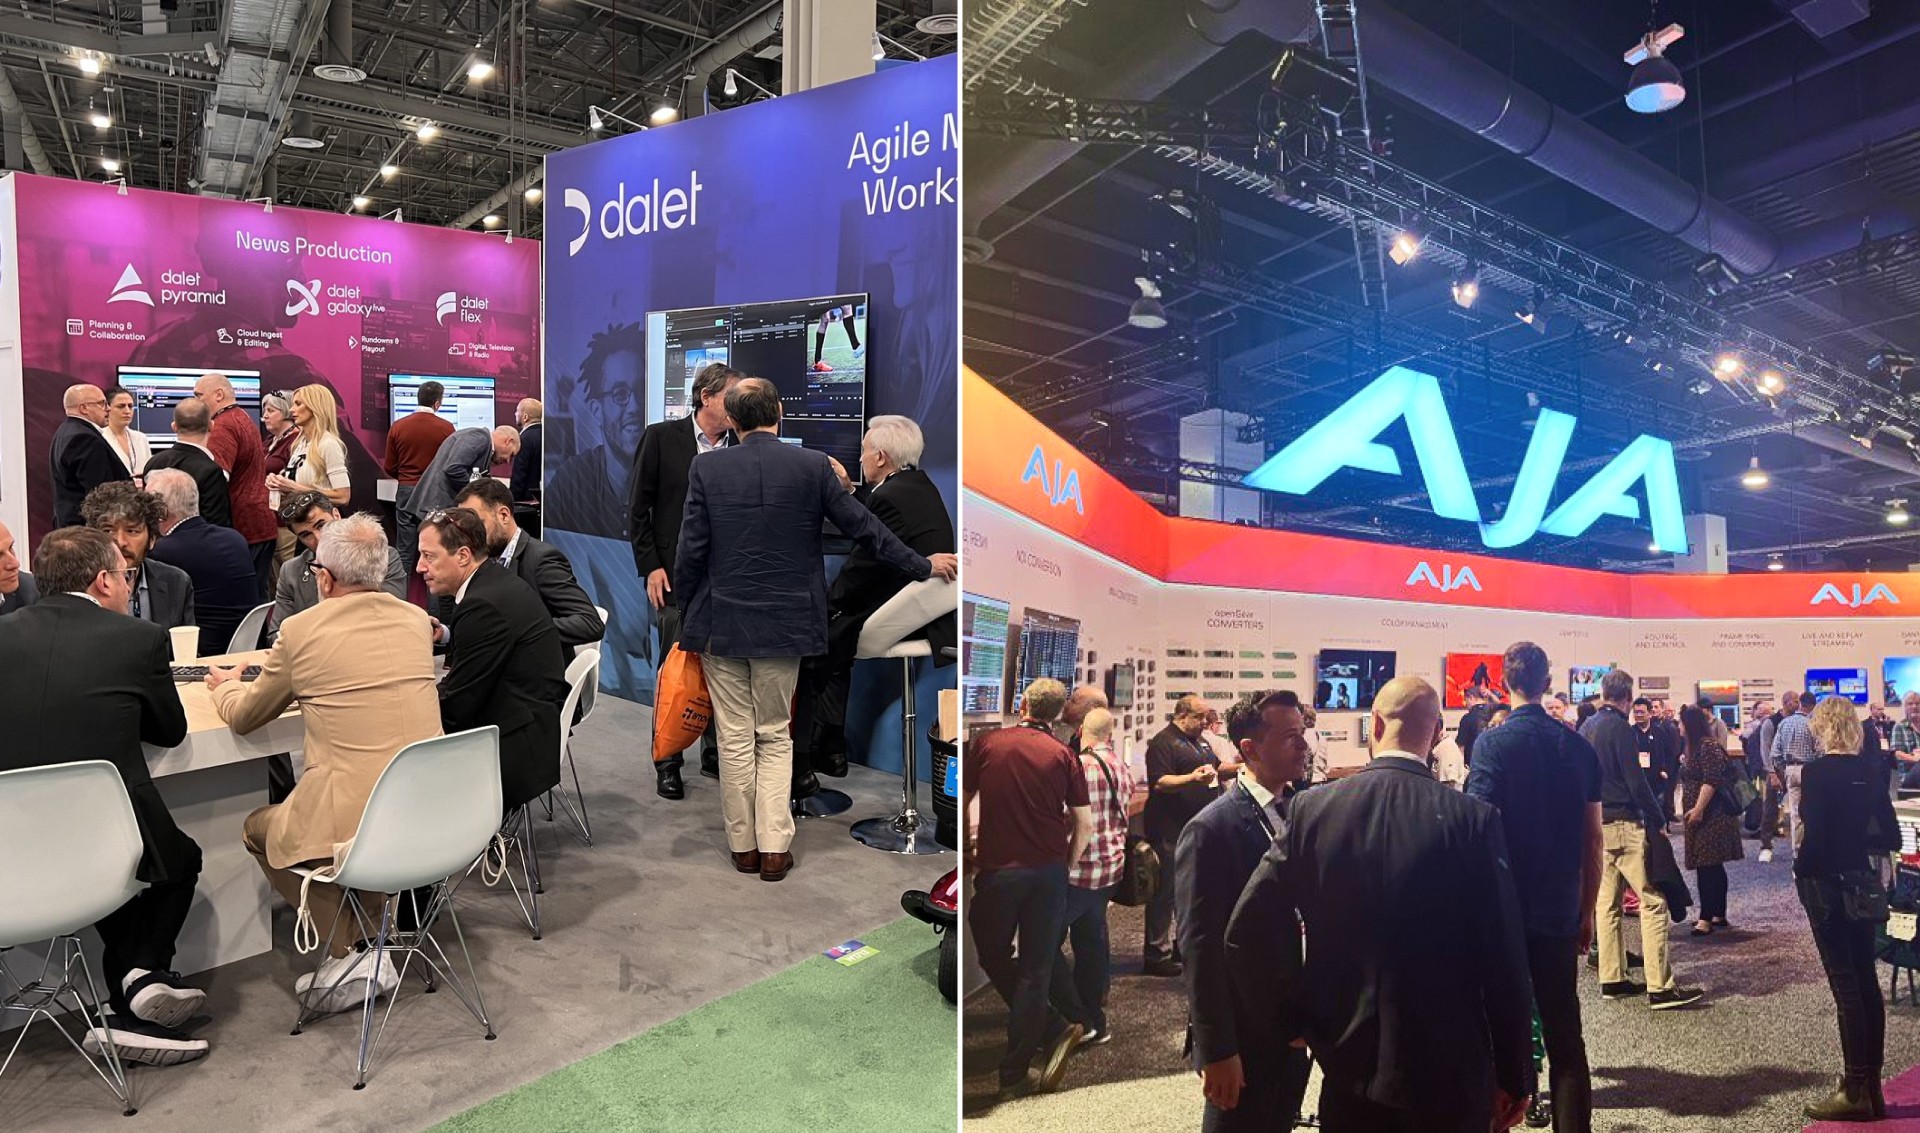 Dalet and AJA booths